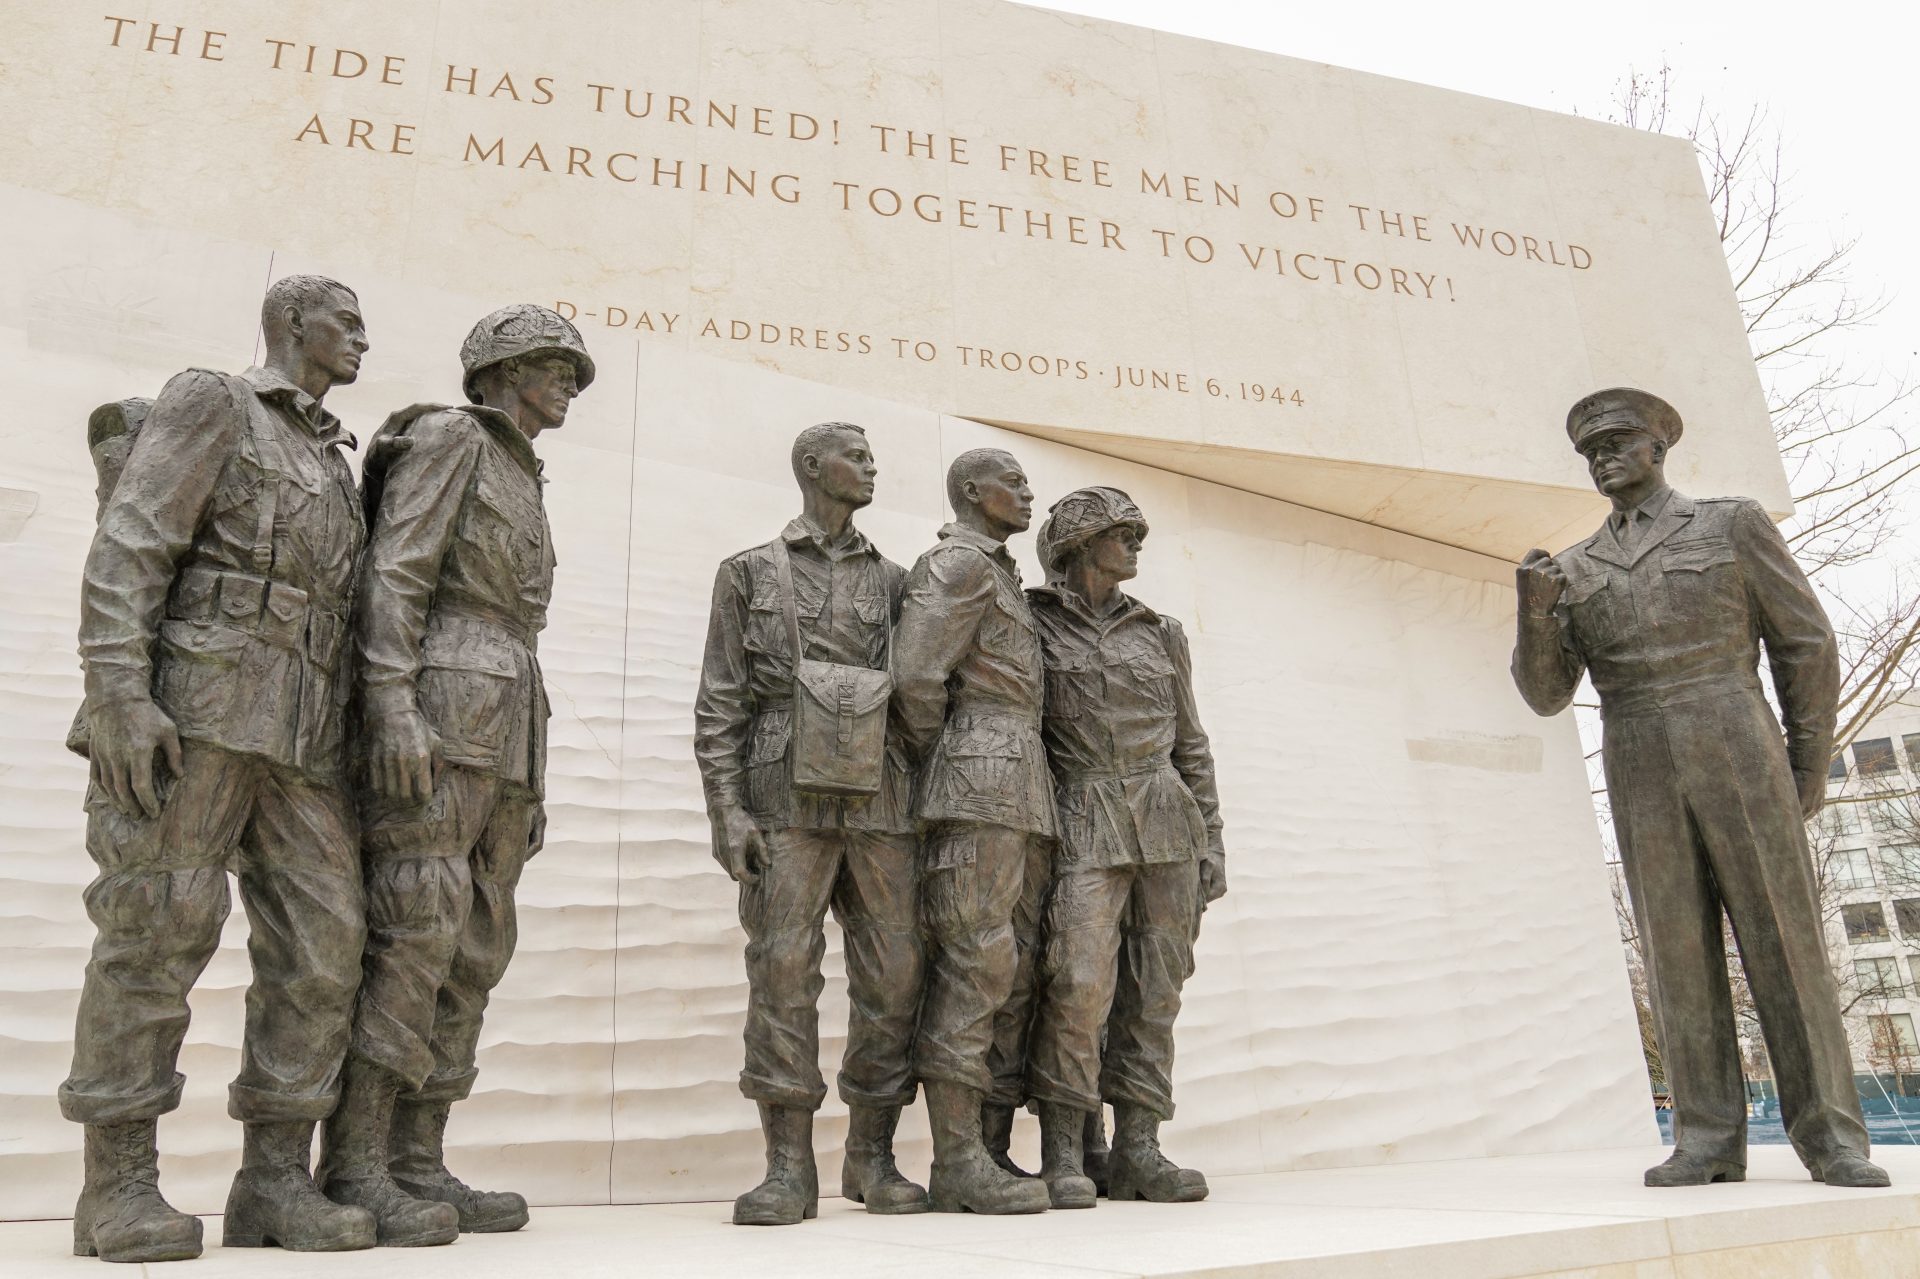 Eisenhower's words — such as his D-Day address to the troops — are inscribed in the memorial.